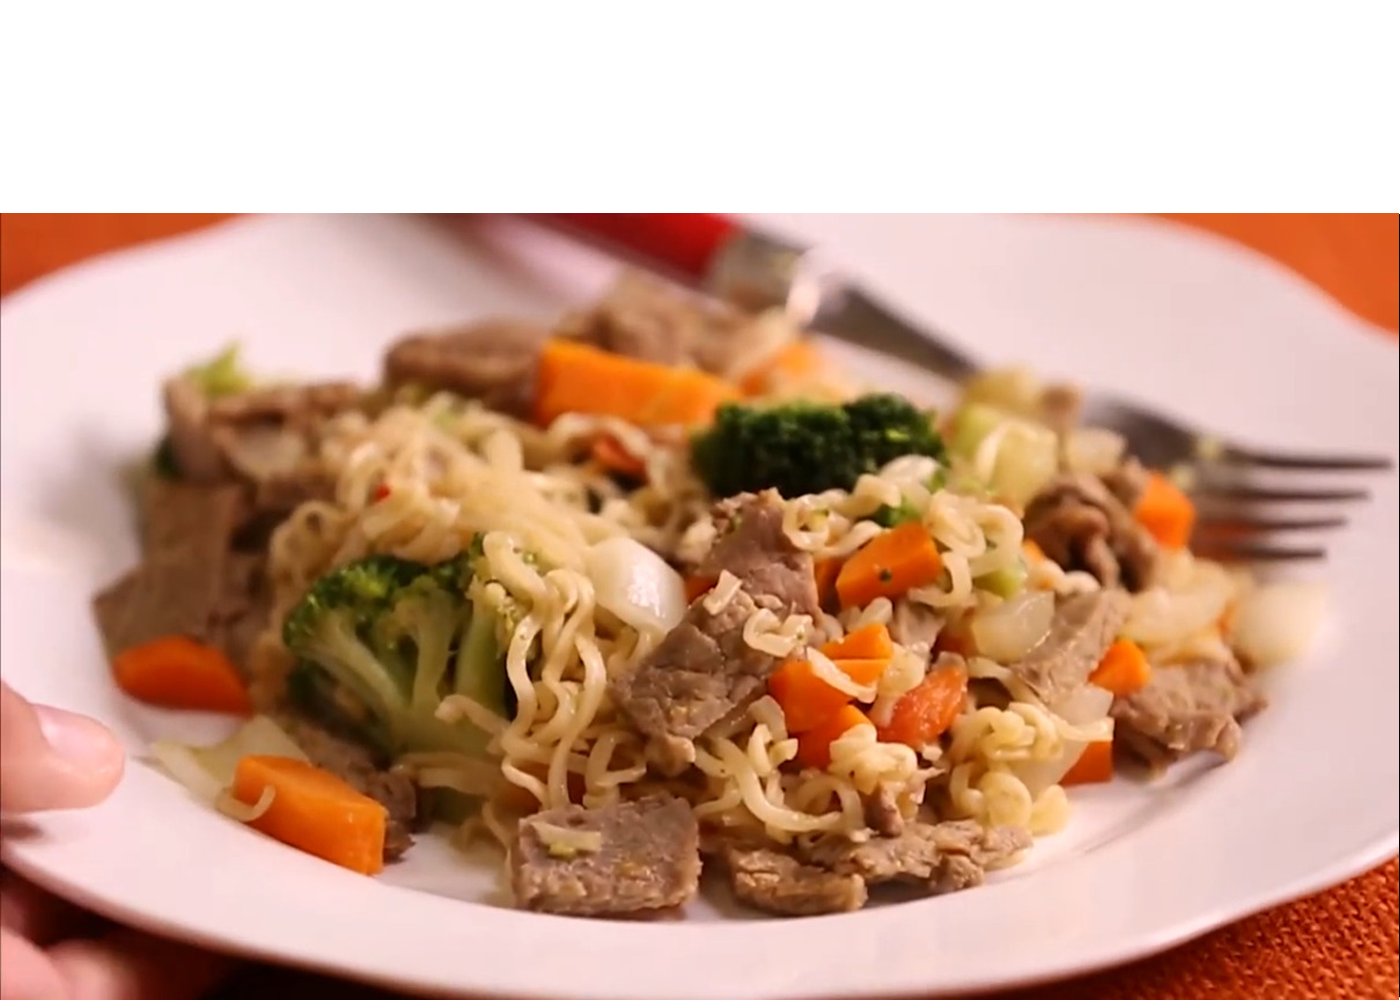 plate of noodles, beef, and broccoli